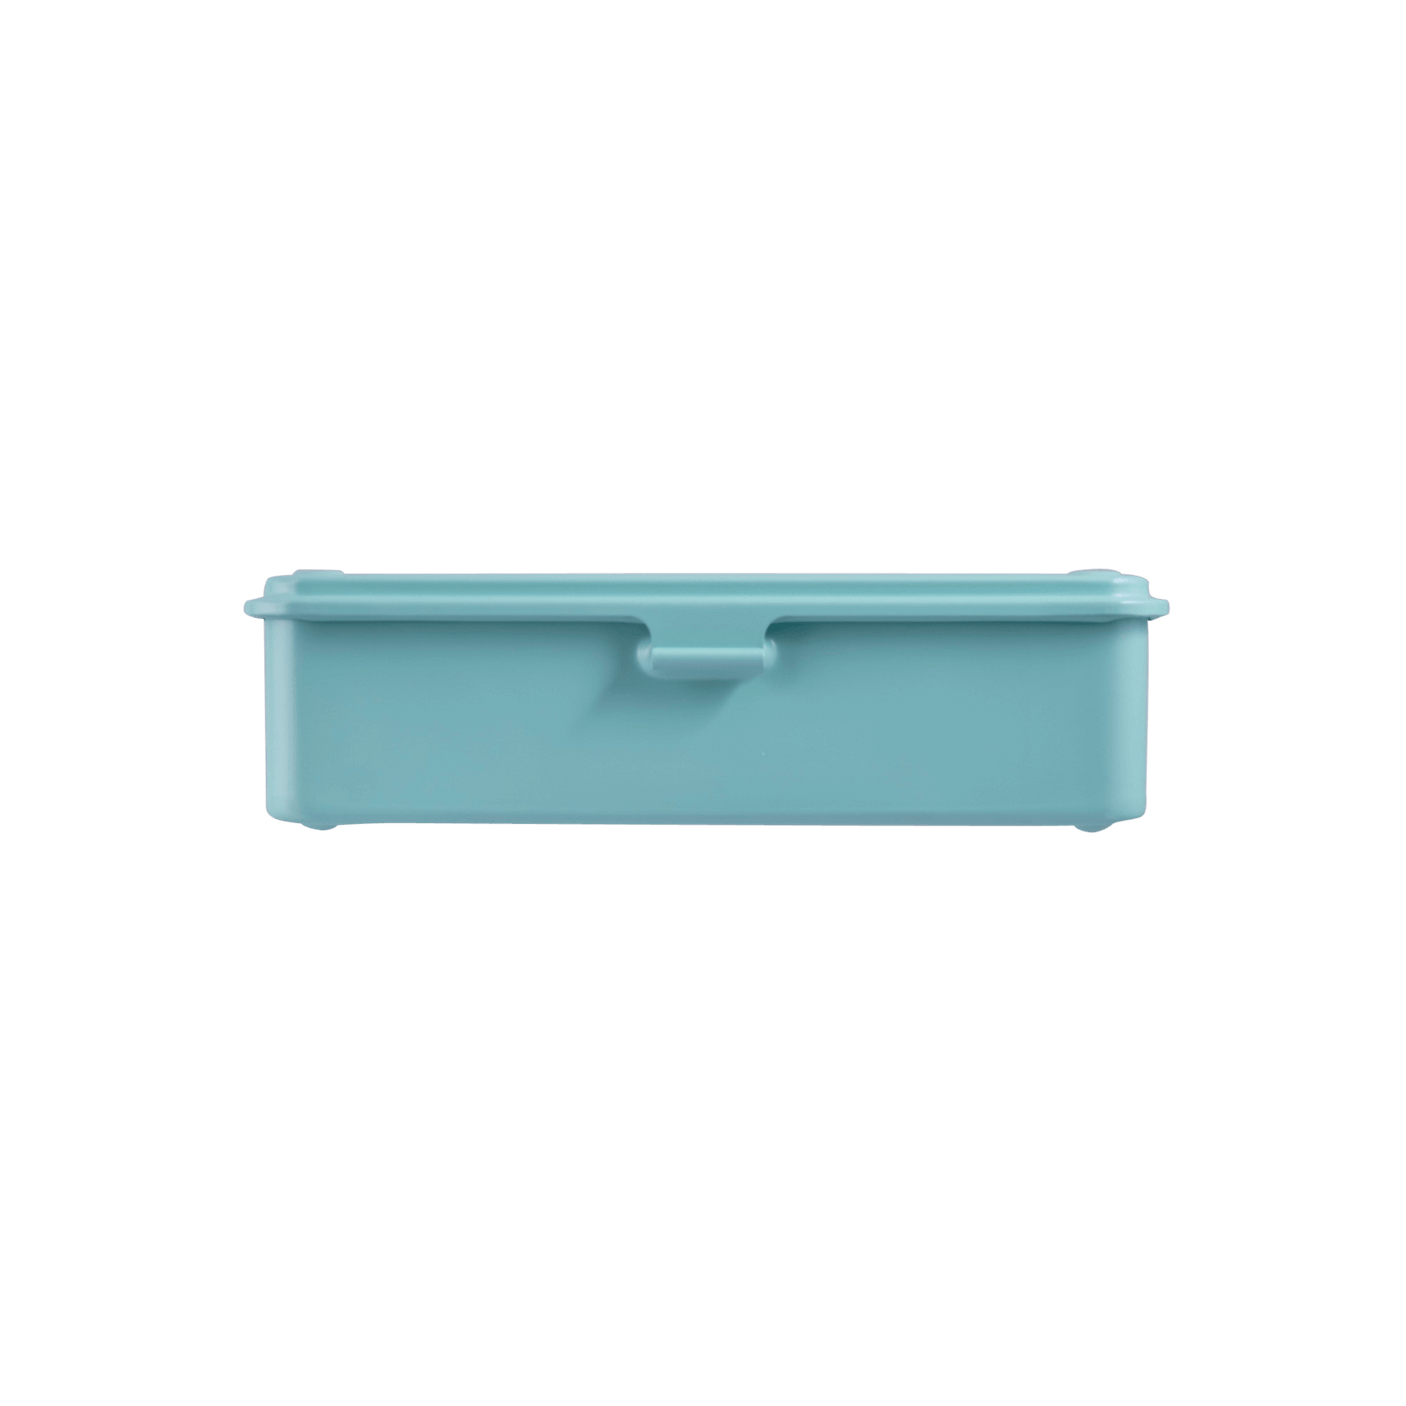 TOYO Trunk Shape Toolbox T-190 SE (Summer emerald green) - Tool Bags Boxes and Rolls - Japanese Tools Australia